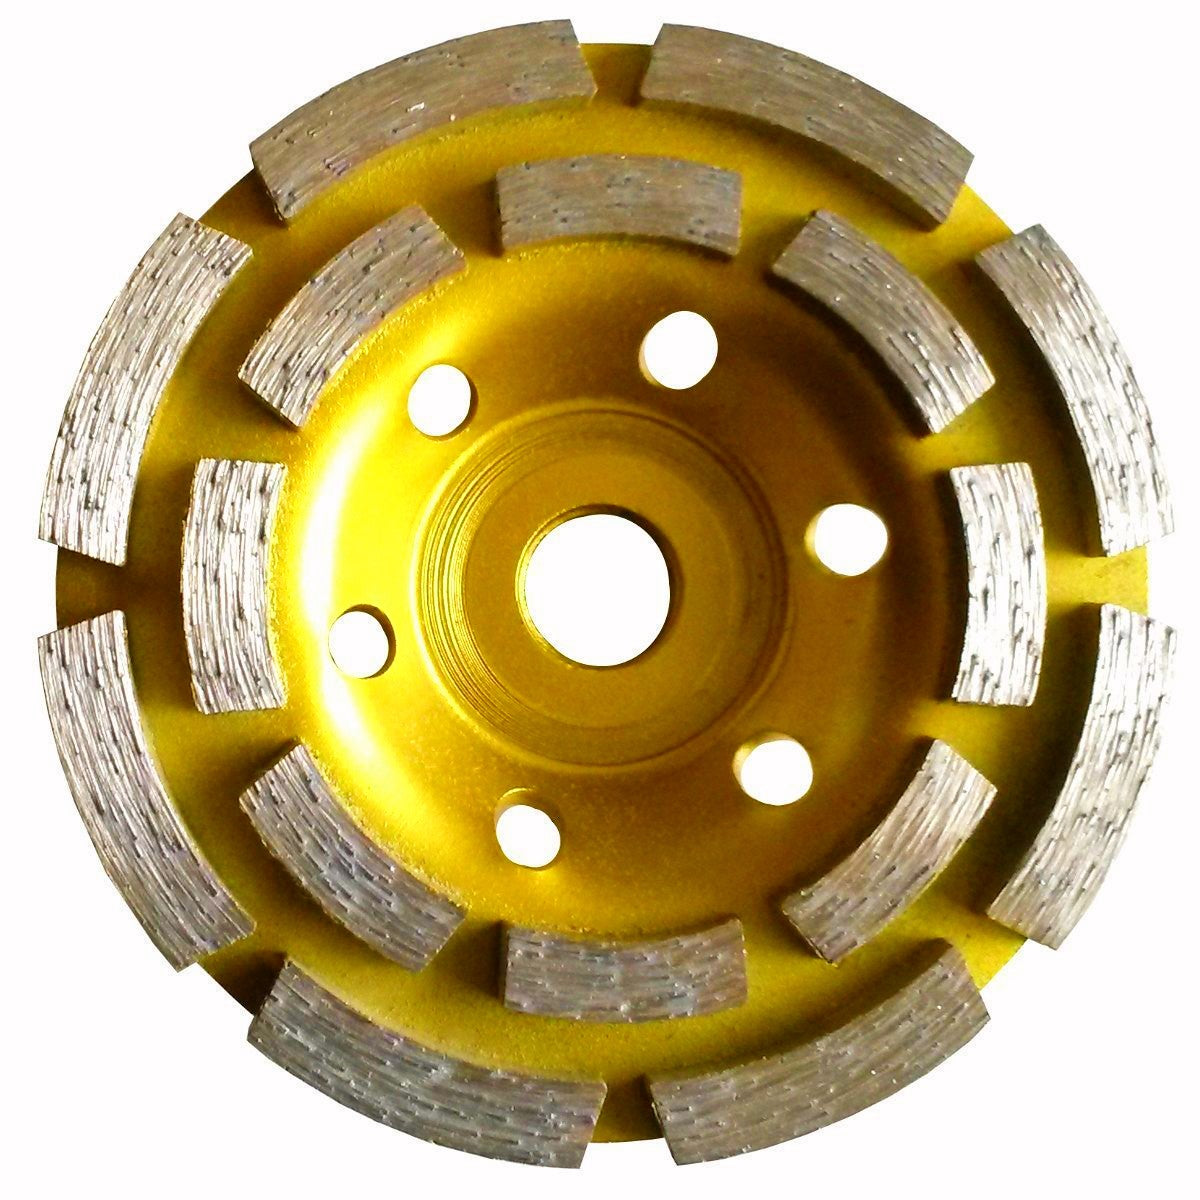 125mm / 5” concrete grinding disc - South East Clearance Centre